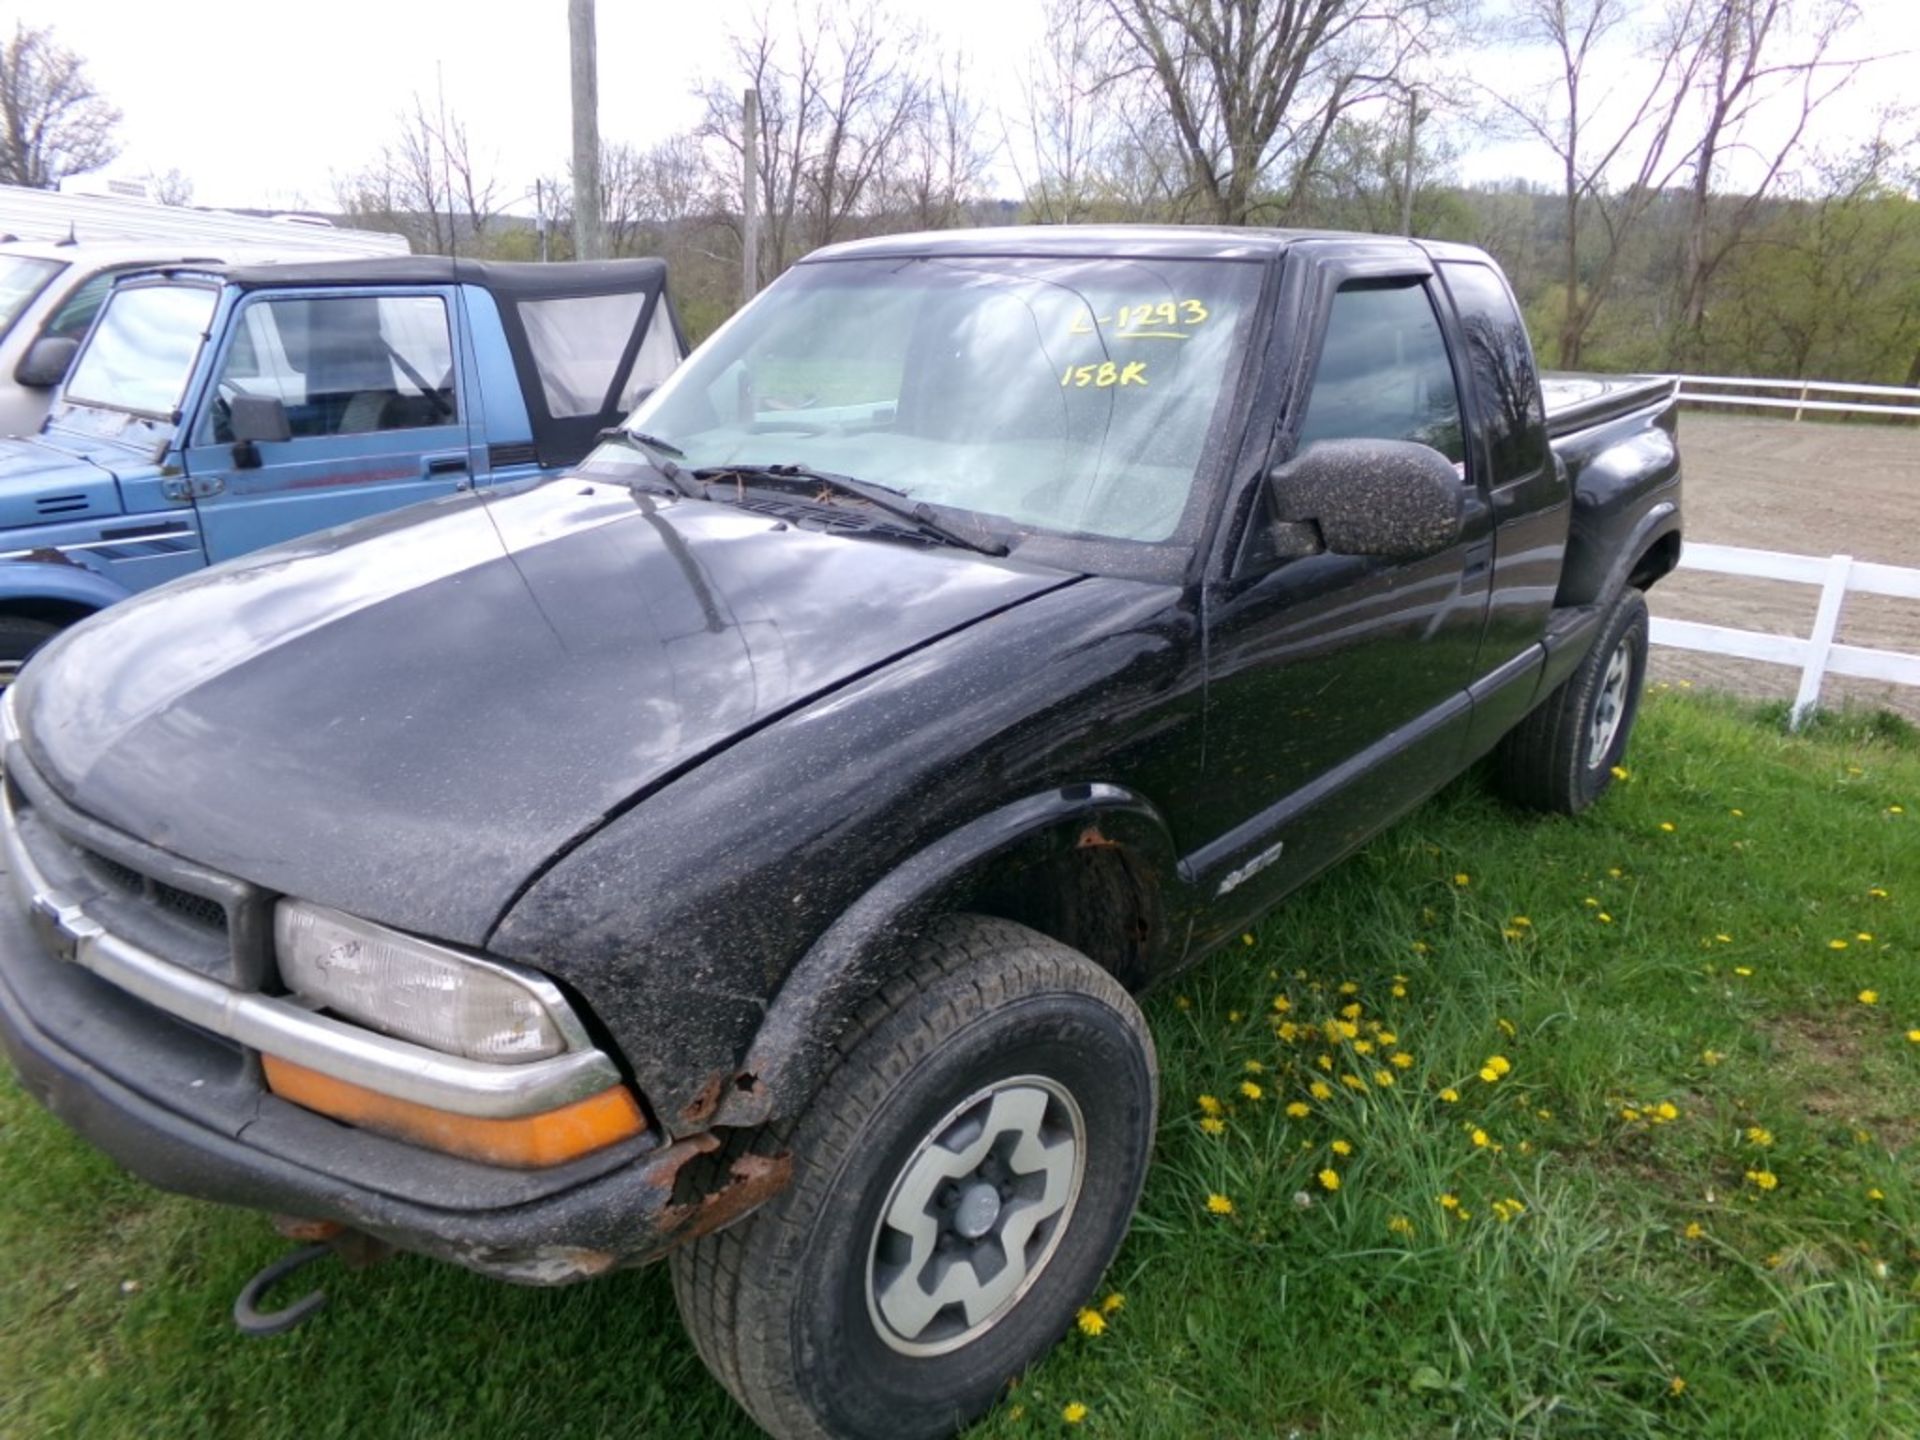 2001 Chevrolet S10 Ext. Cab Flareside, Black, 5 Spd, Manual, 4 WD with Extra Parts in the Bed,